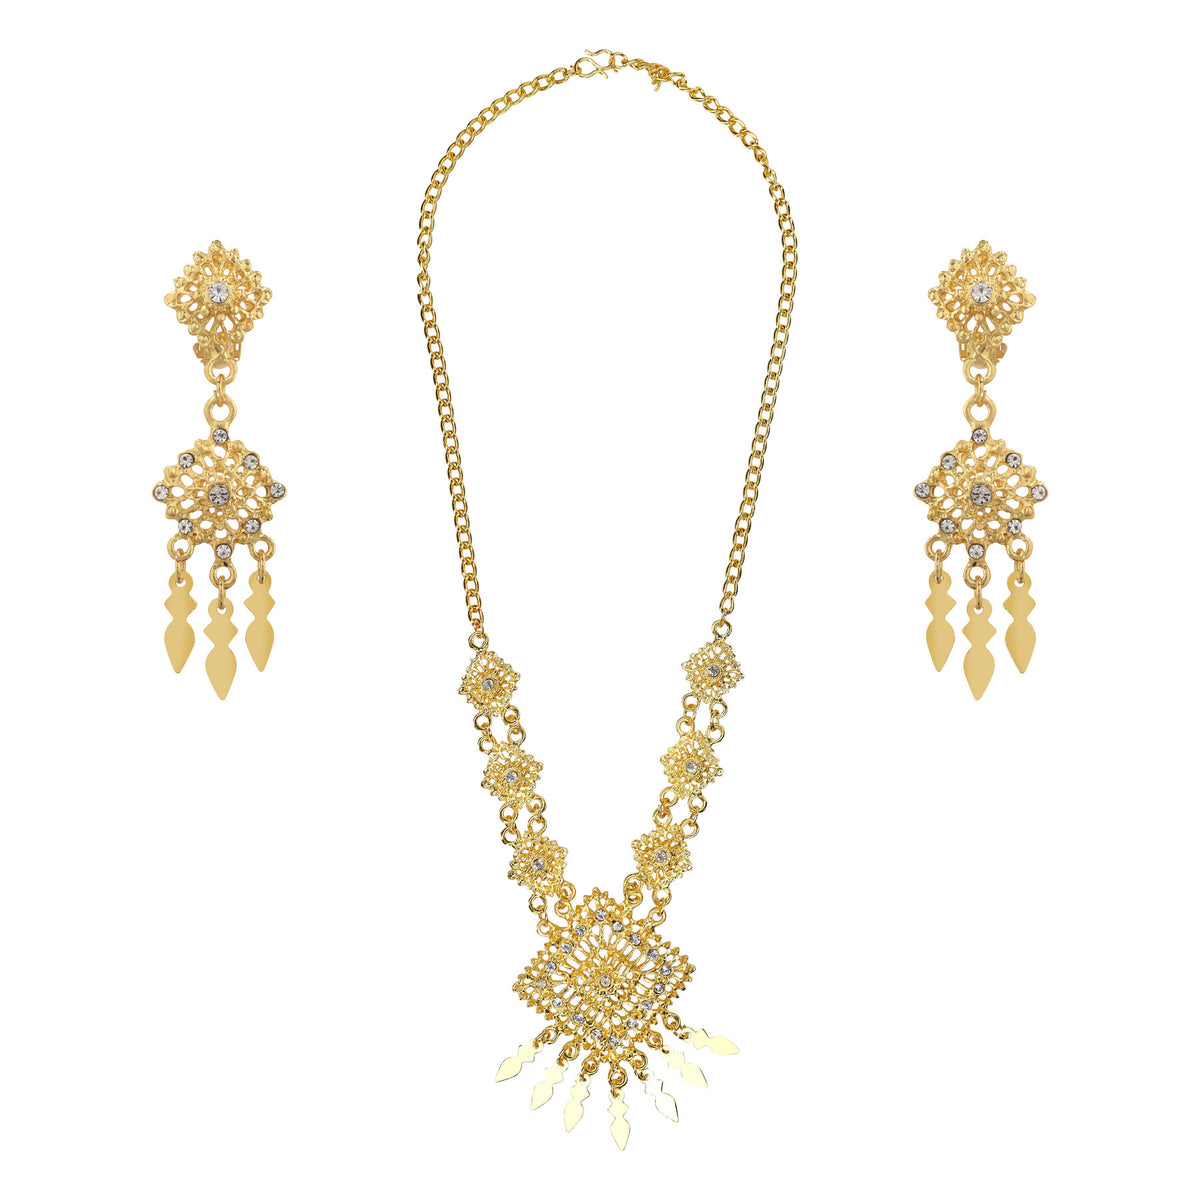 Gold Thai necklace and earring set that make a great addition to your Traditional Thai outfit.